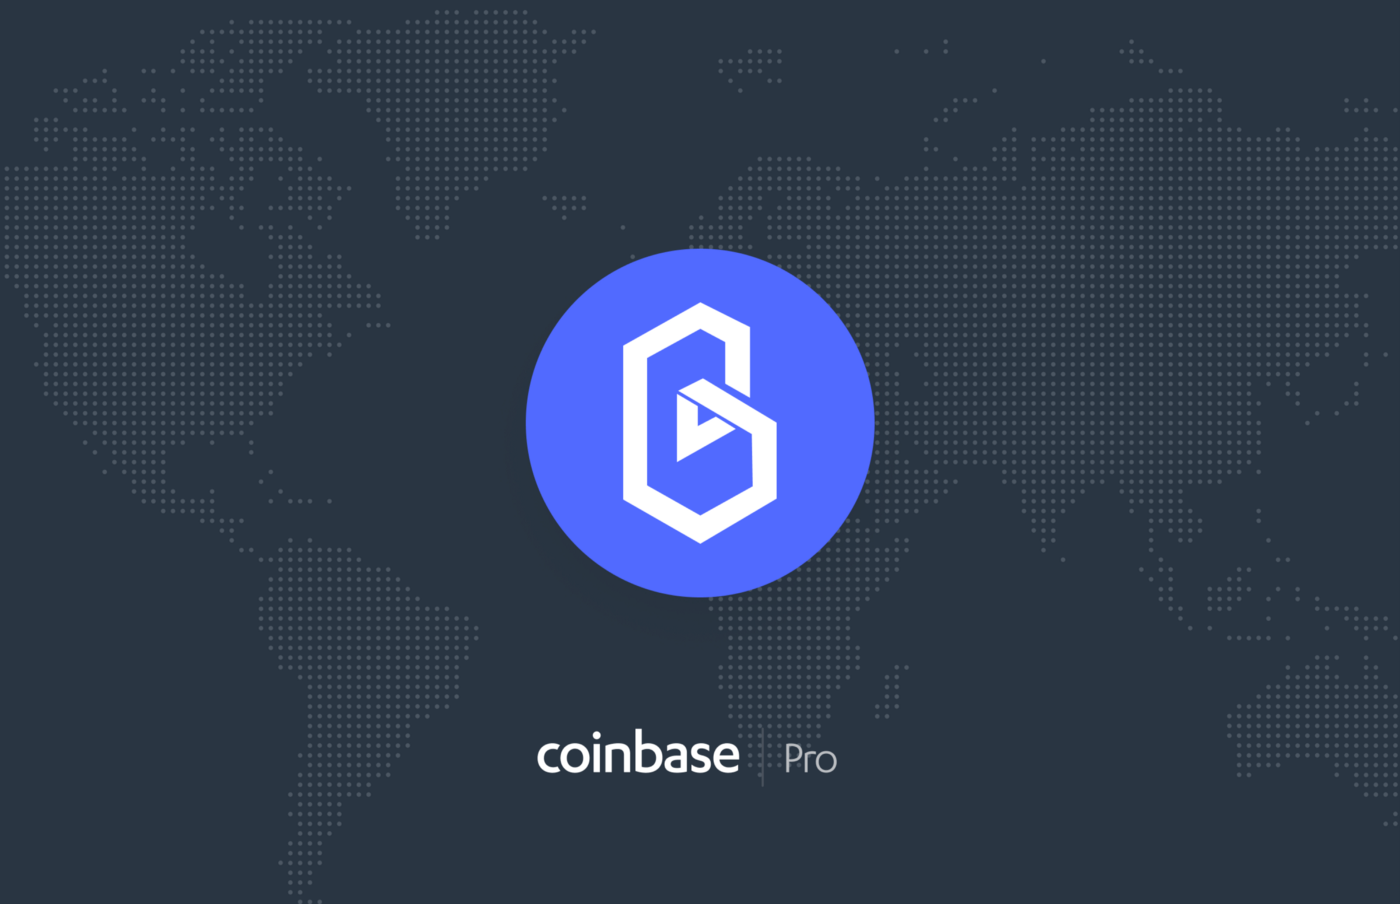 Band Protocol (BAND) is launching on Coinbase Pro